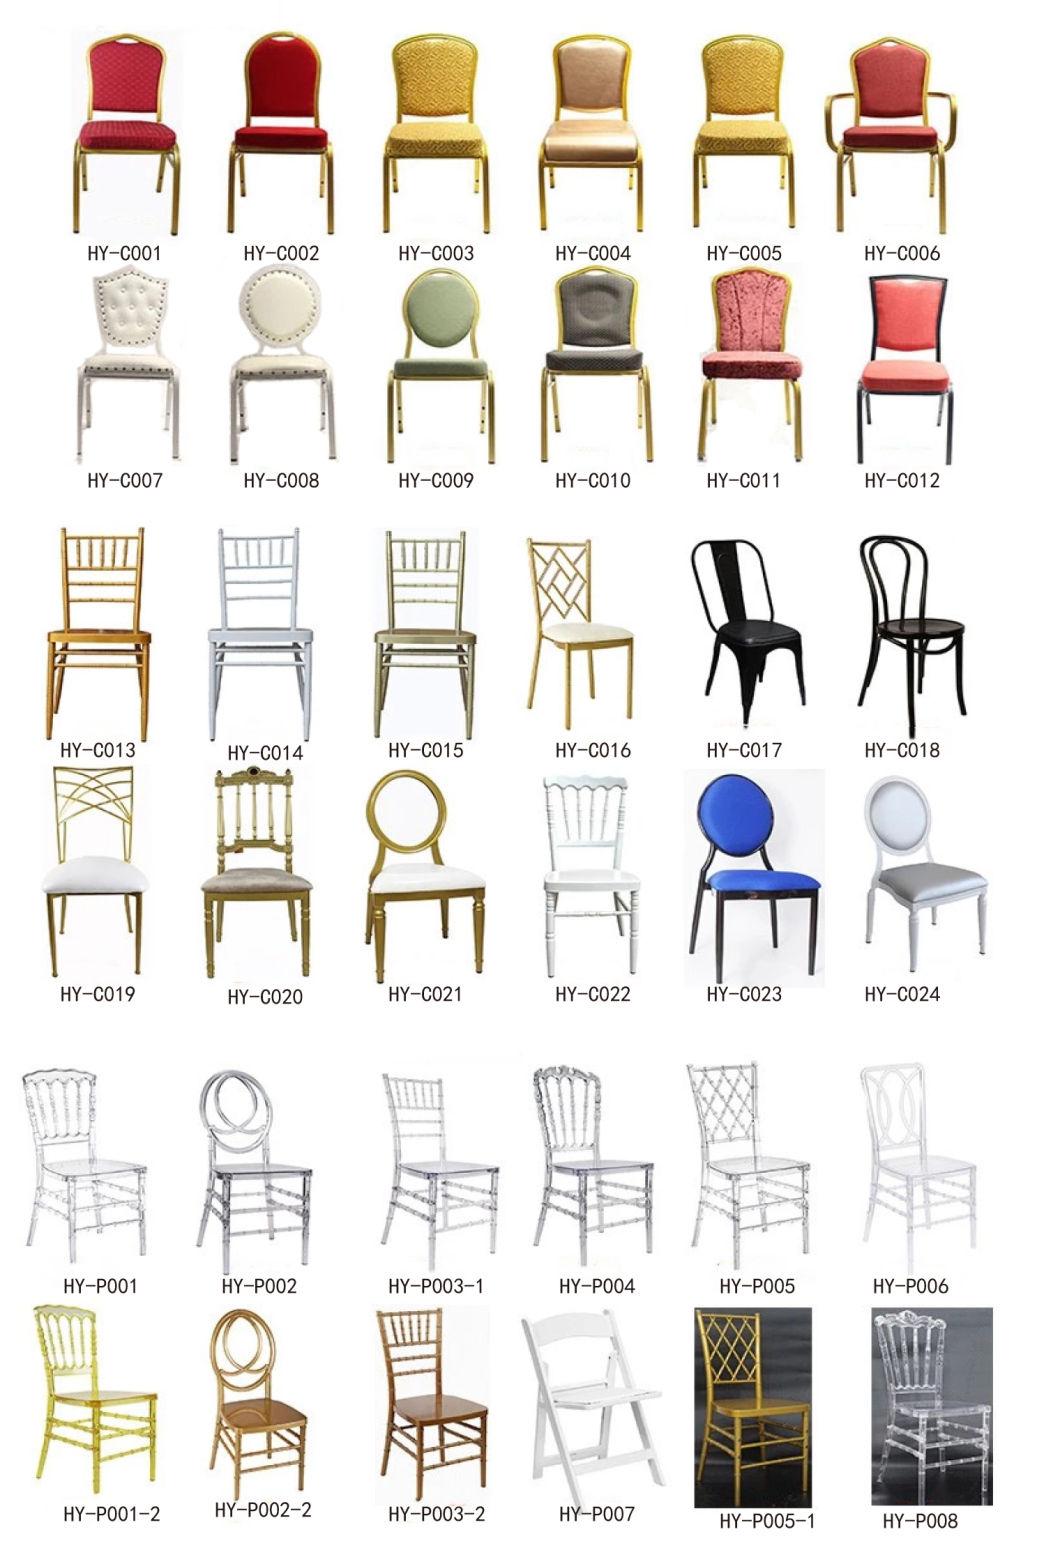 Modern New Back Decoration Wedding Chairs Banquet Folding Chair Event Rental Chair 6 9 Fugire Chair Kite Back Decors Black Velvet Dining Chairs